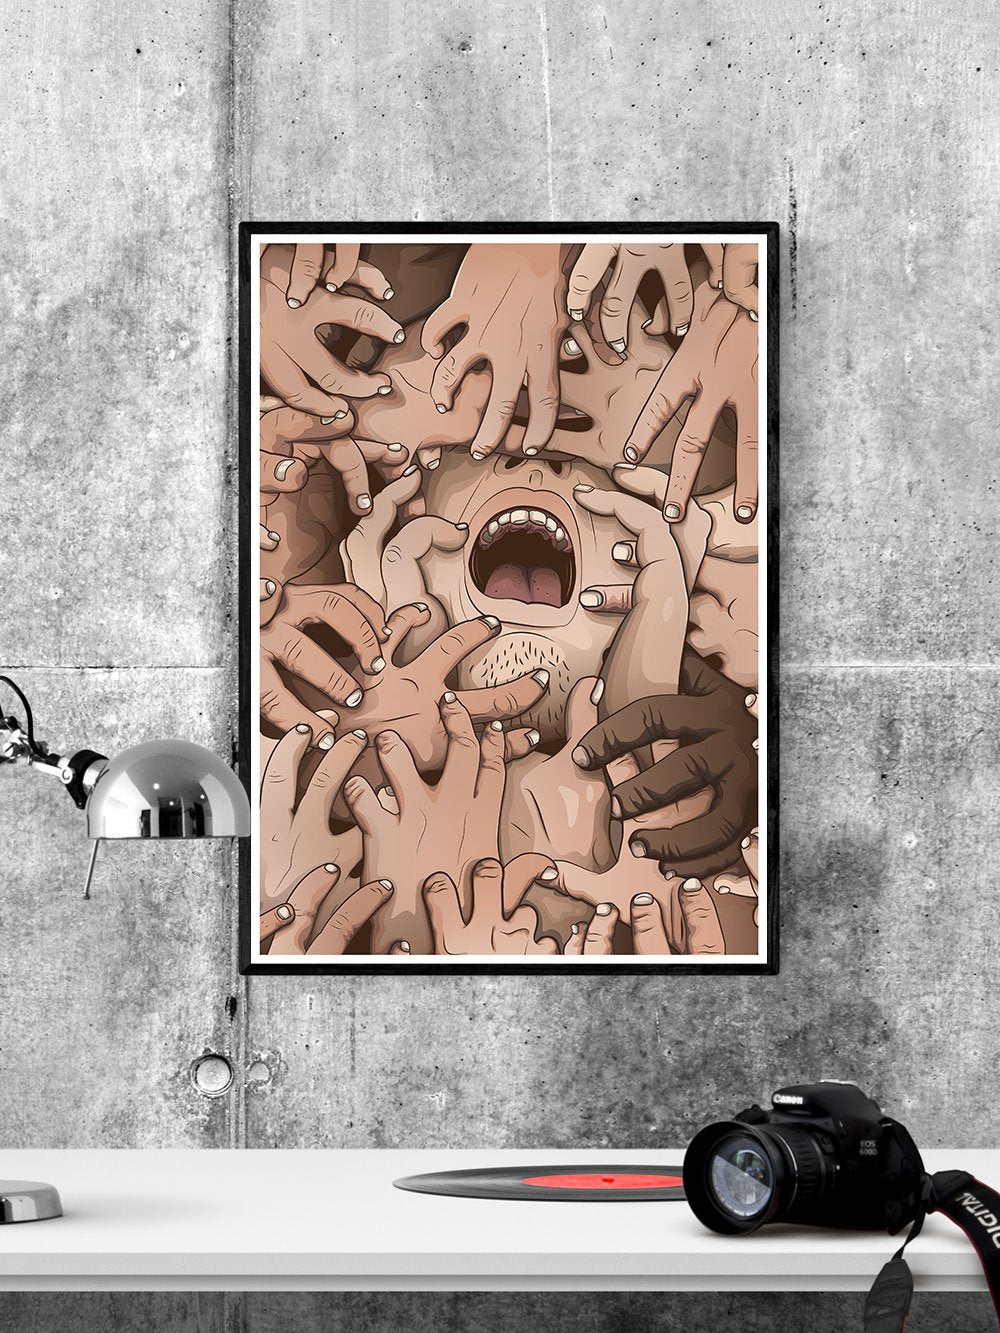 Consumed Sci Fi Art Print in a frame on a wall